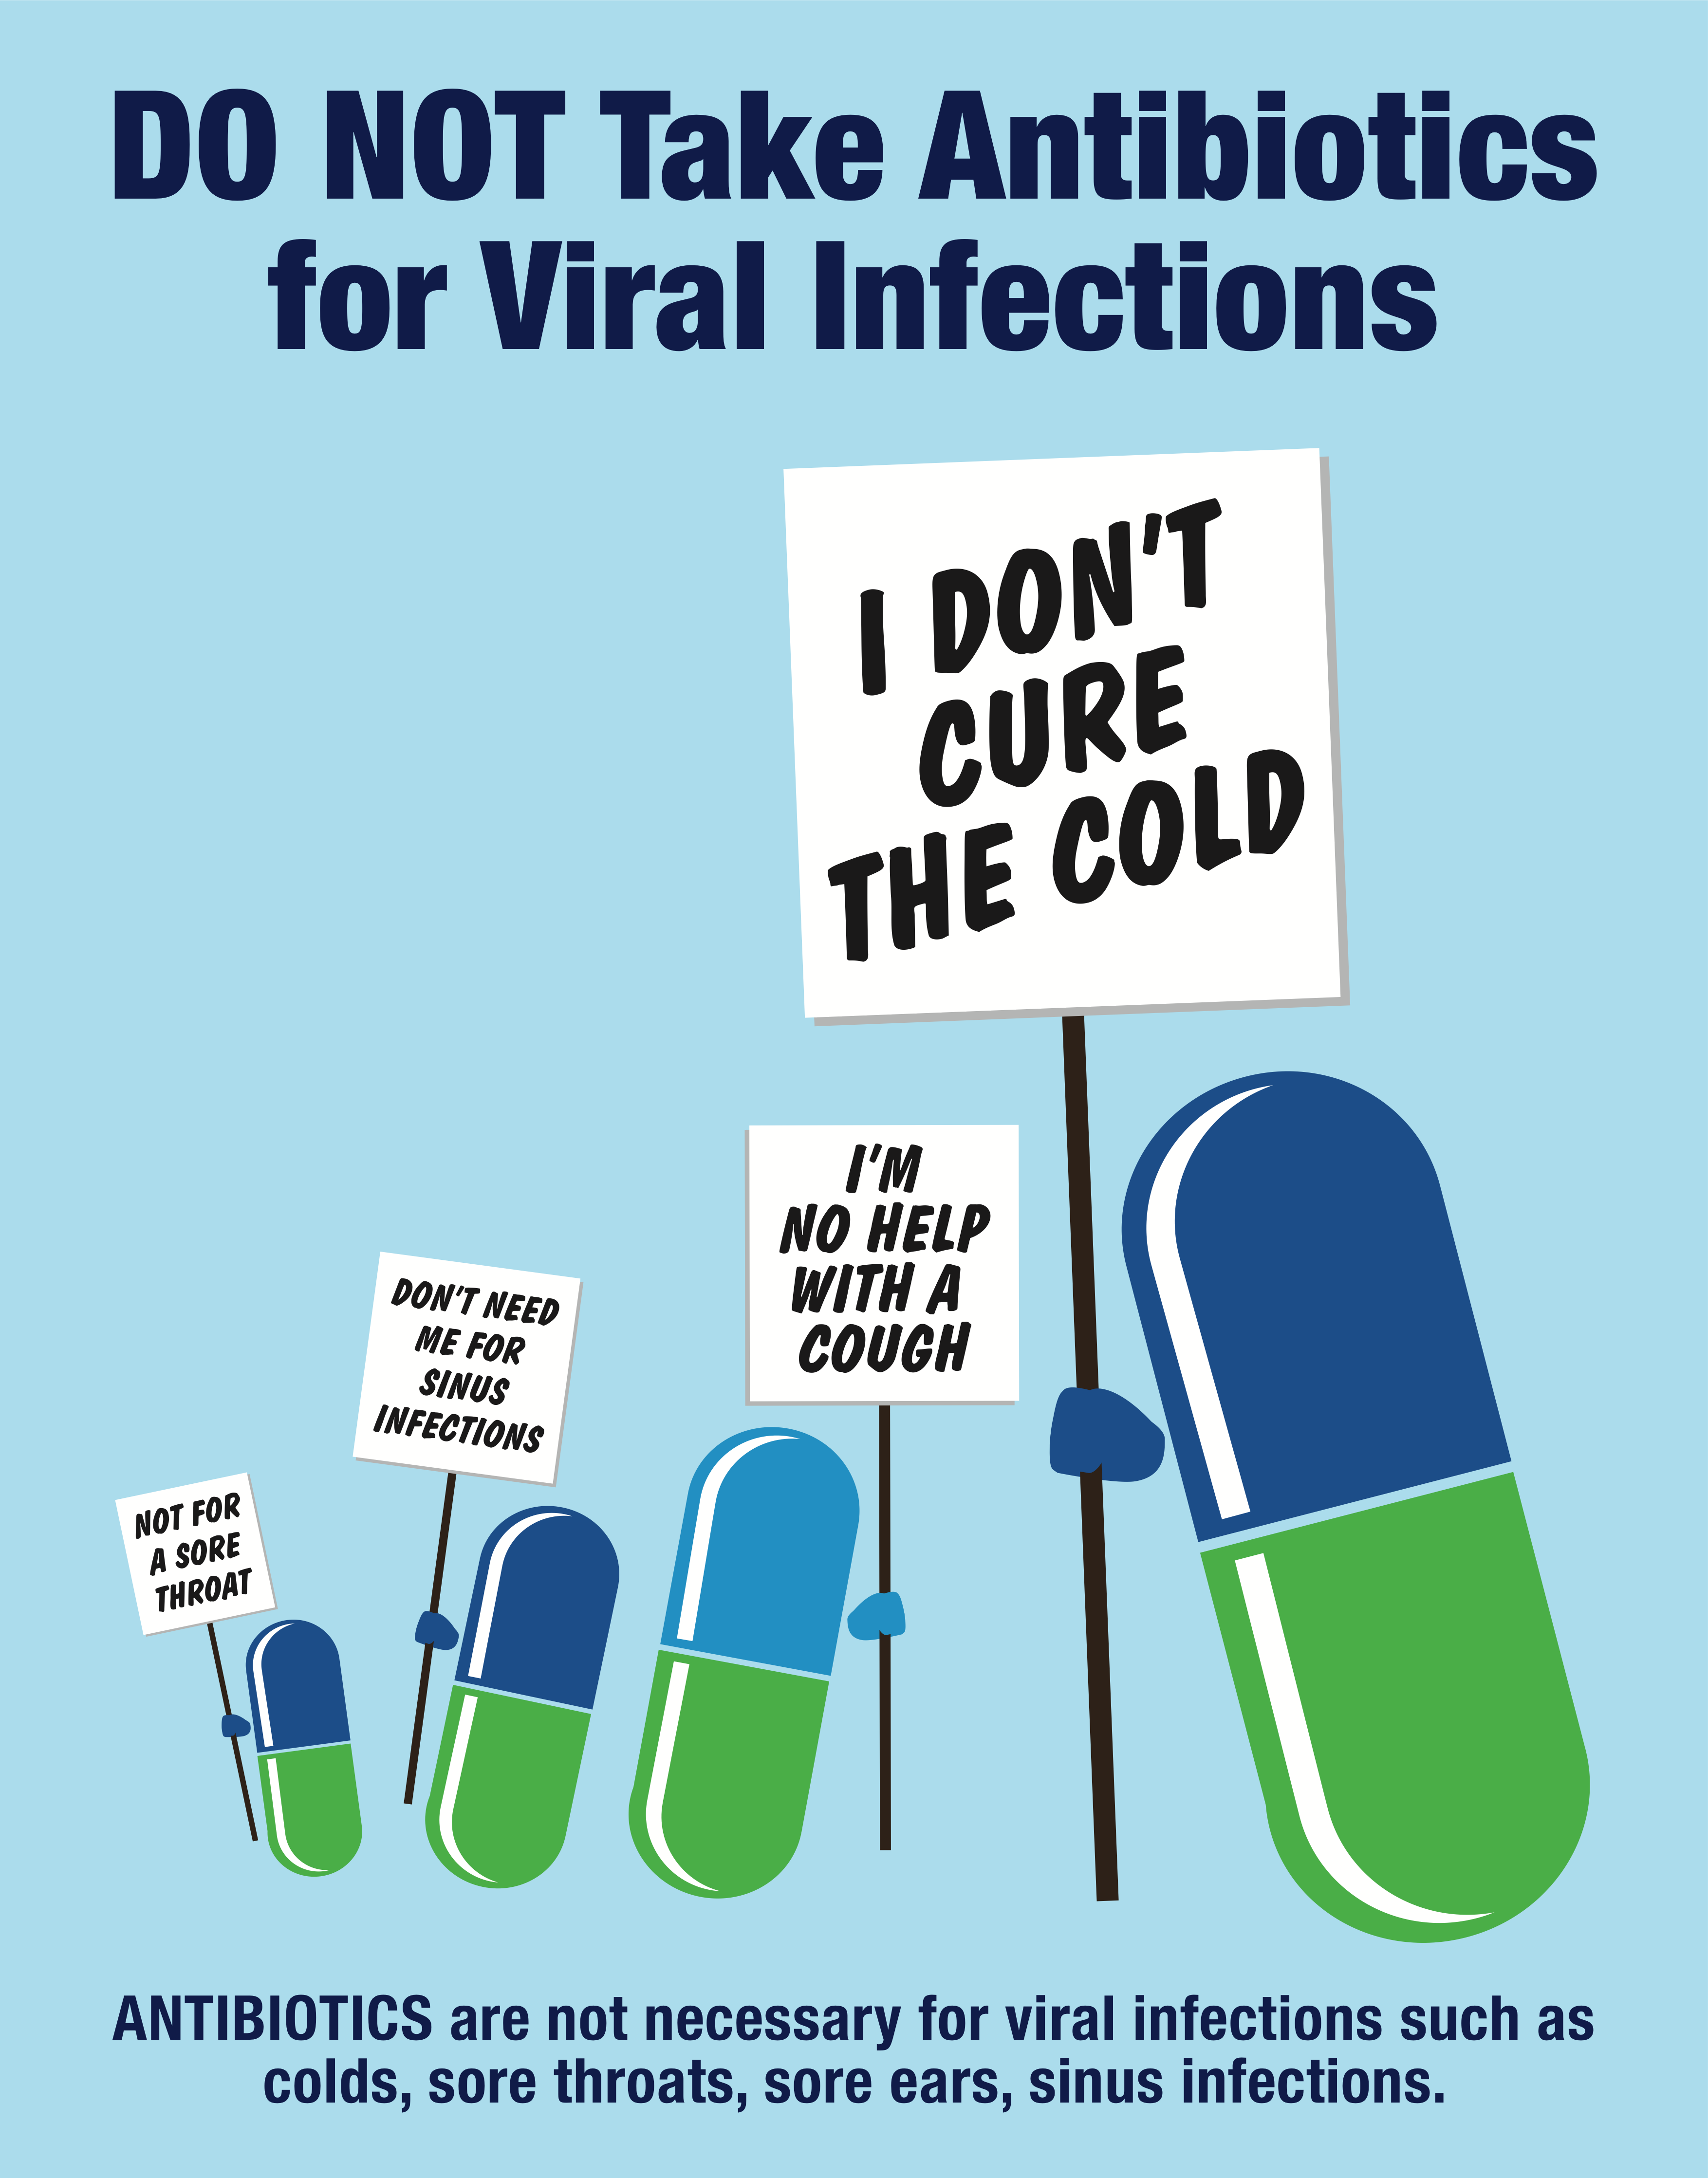 Do not take antibiotics for viral infections